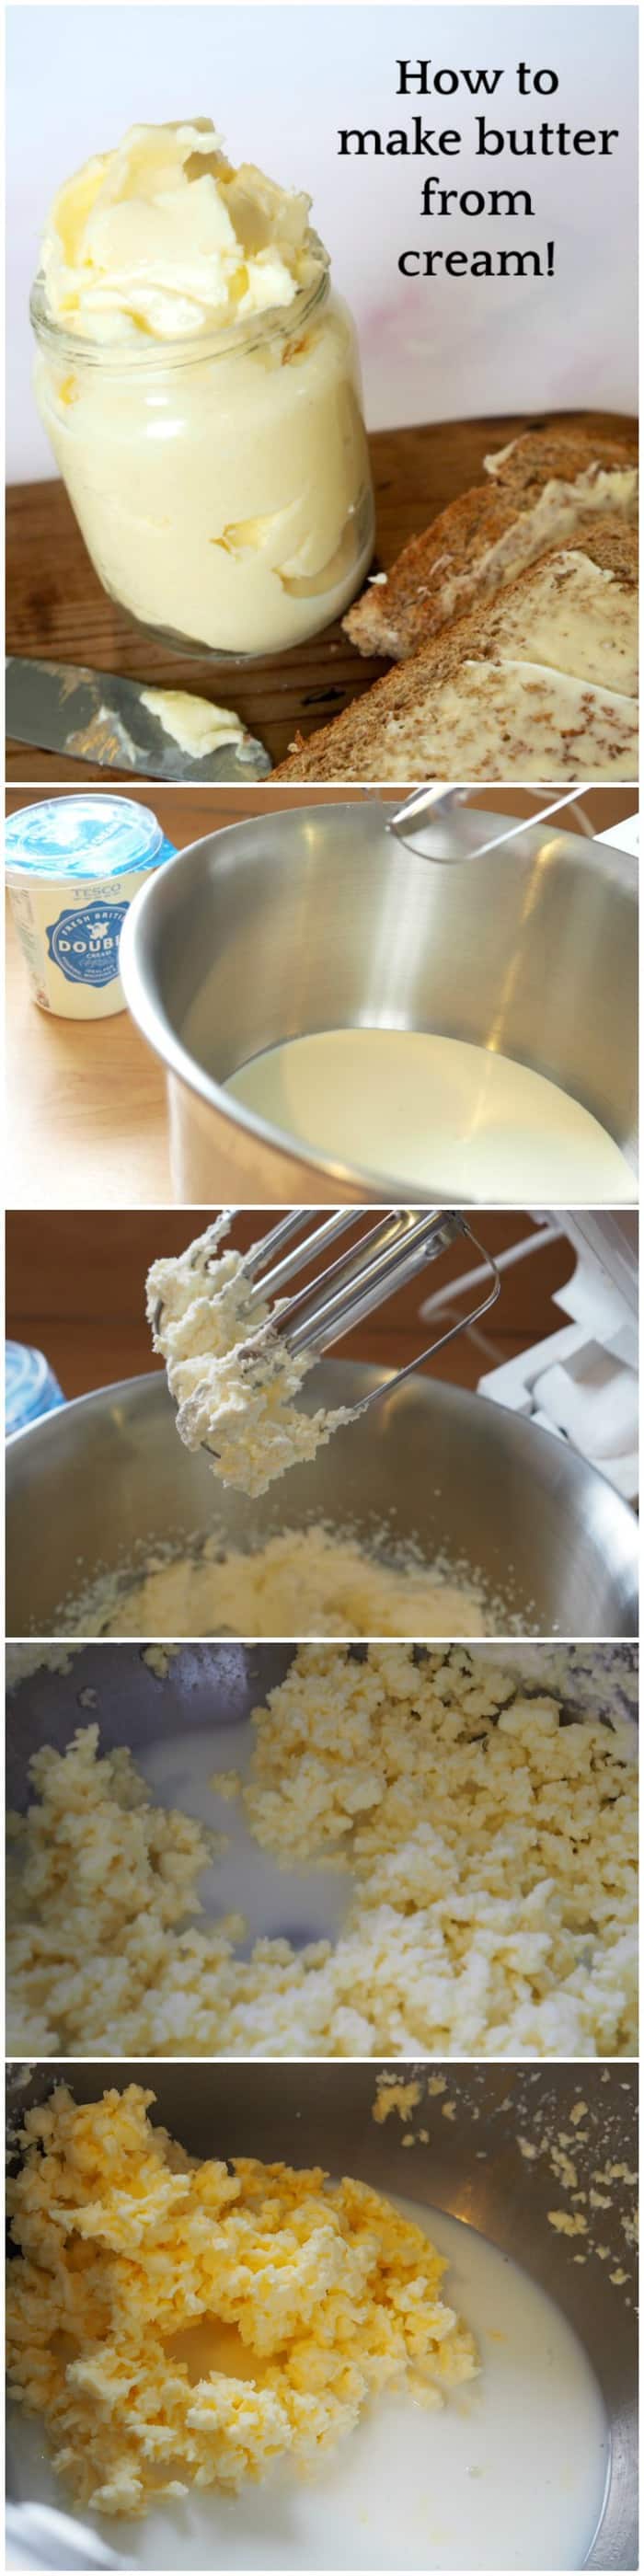 How to make butter from cream - step by step guide...